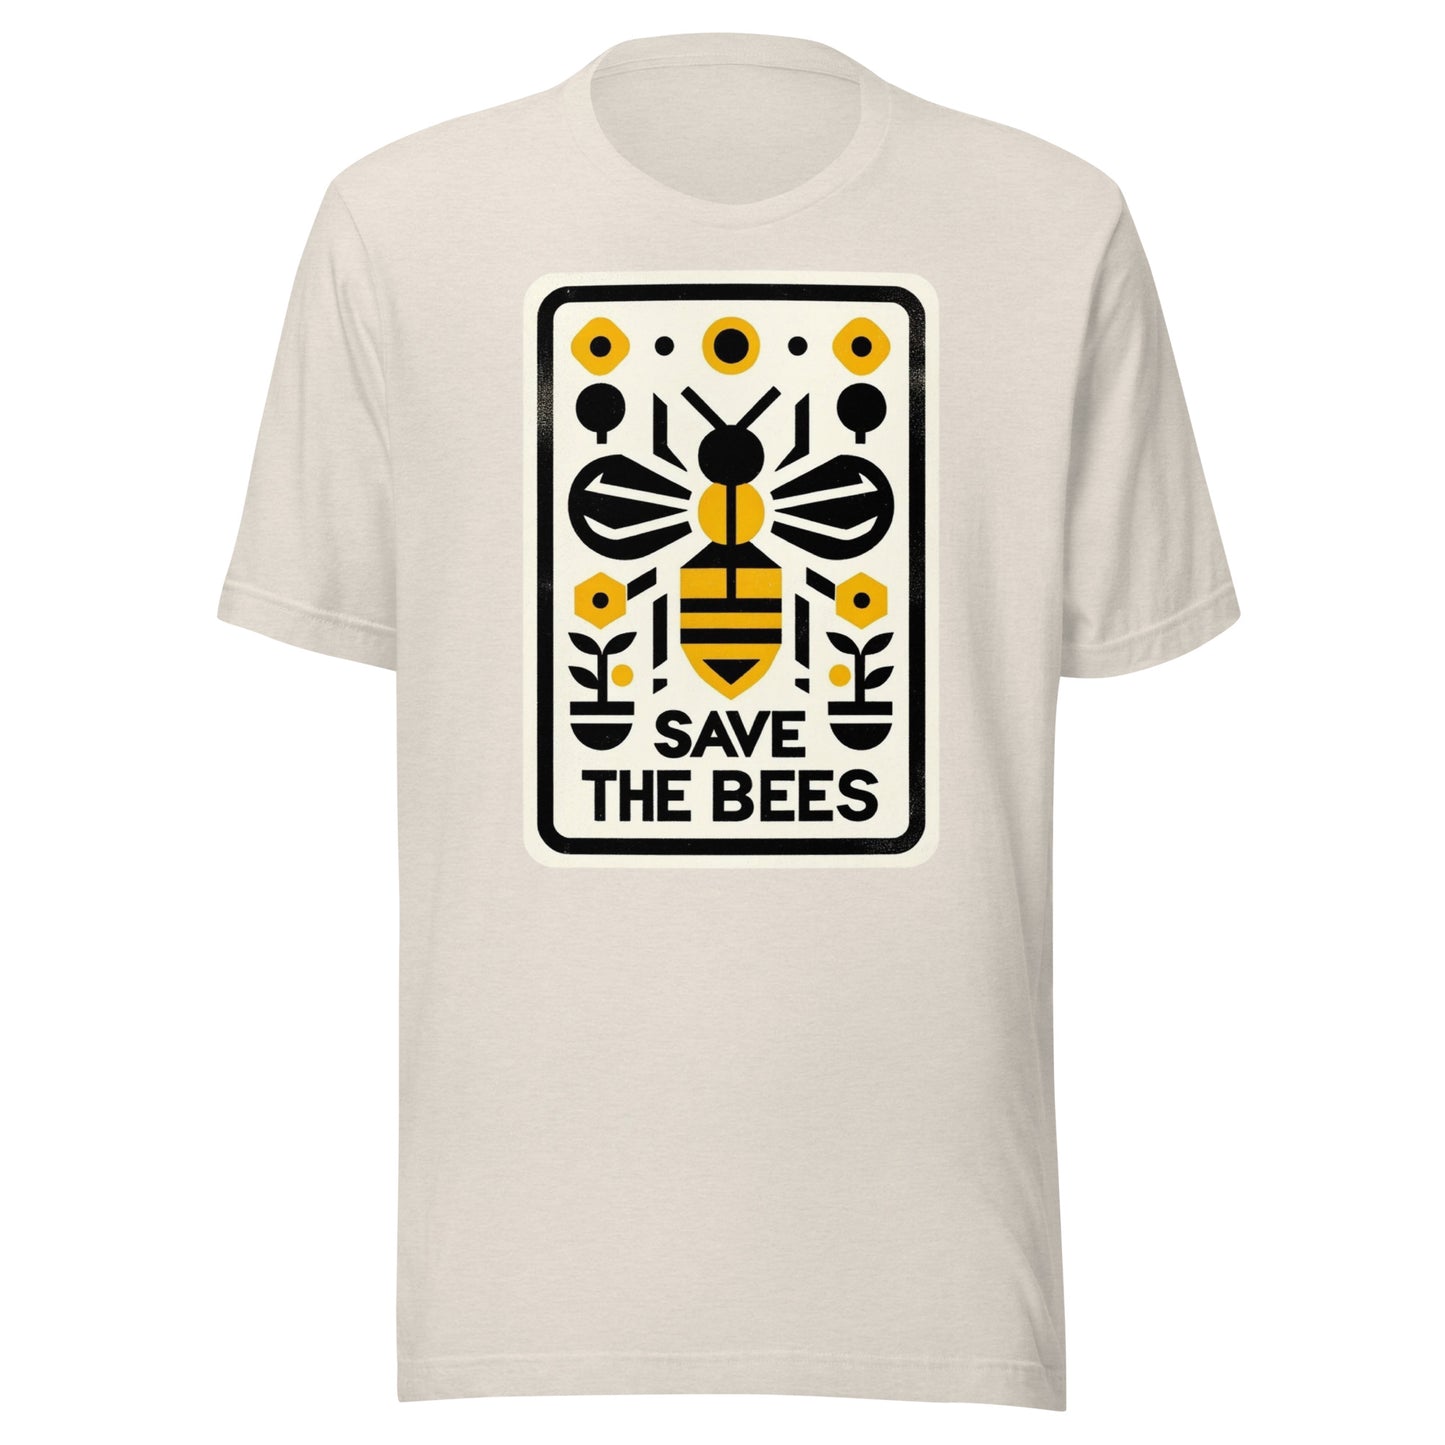 Minimalist Bee Conservation Graphic: Save The Bees Unisex t-shirt